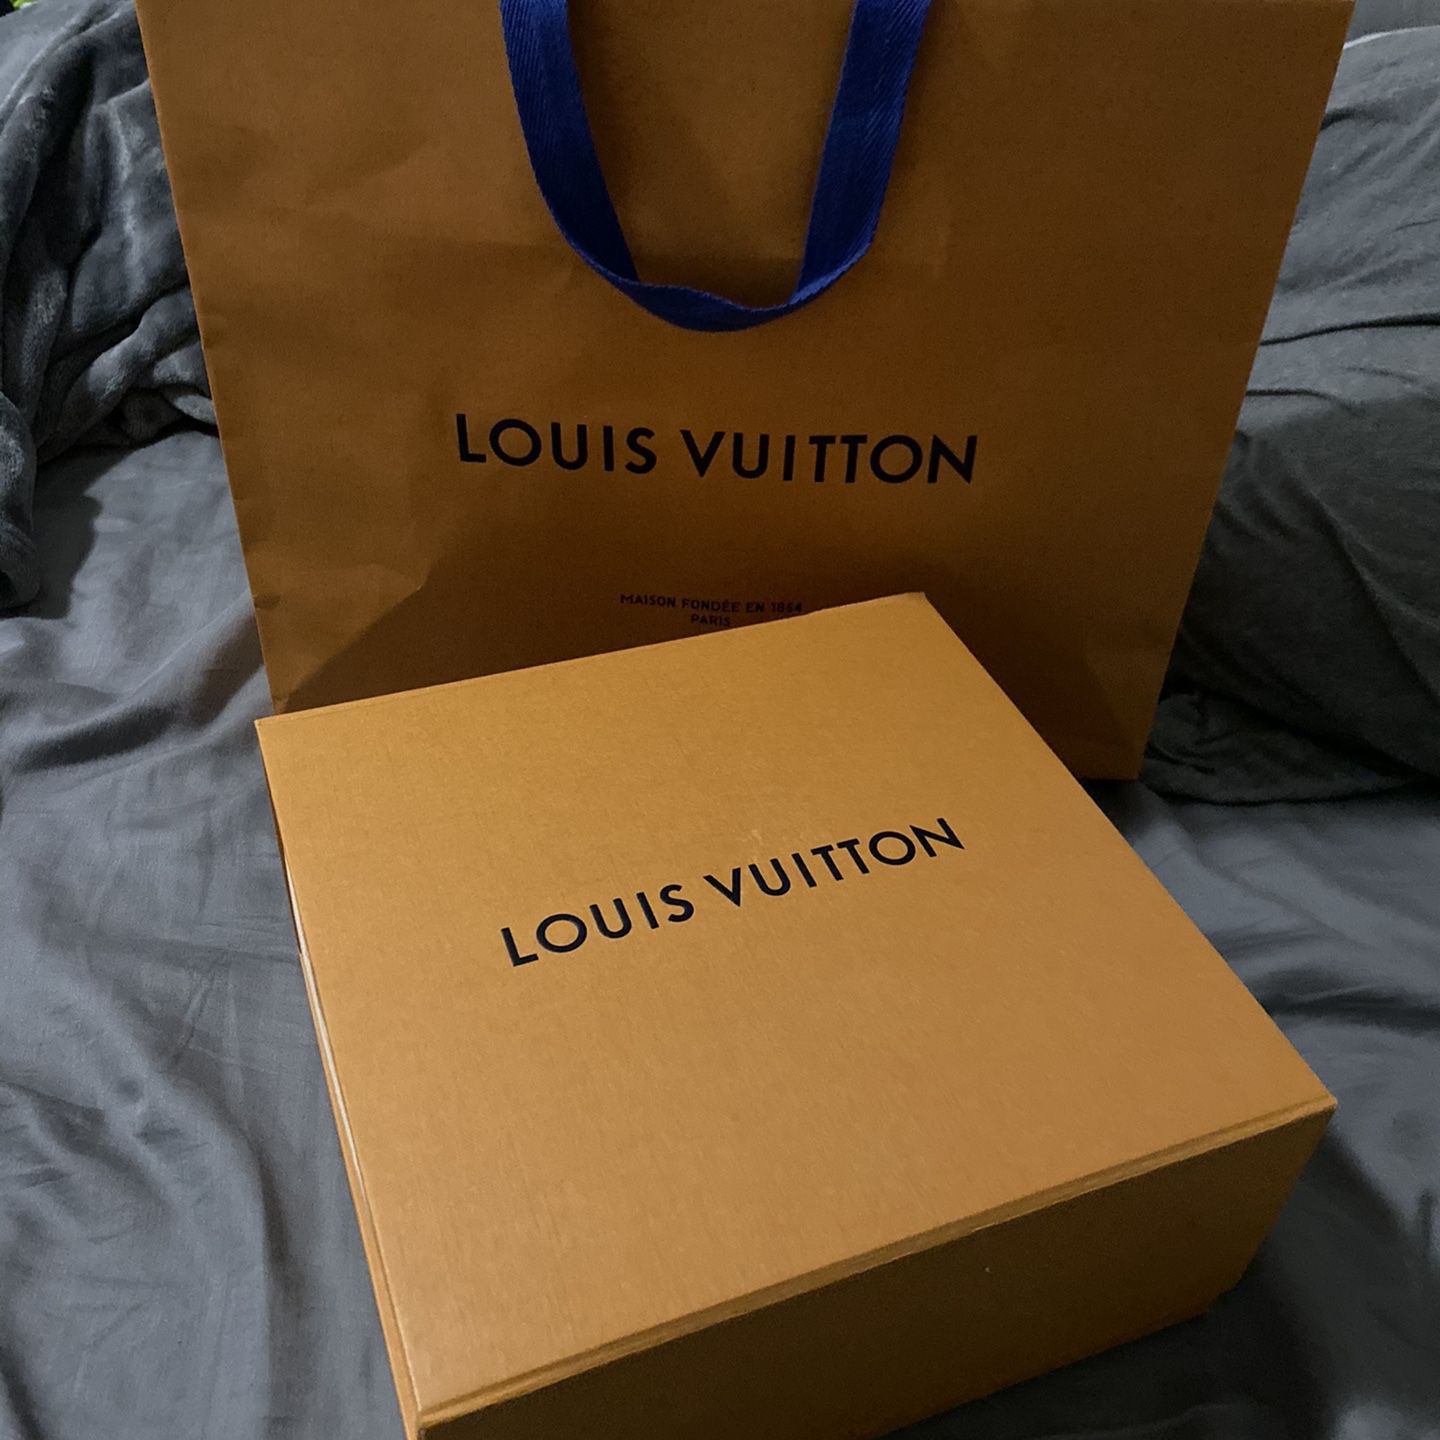 Authentic Louis Vuitton Box and Bag for Sale in Montebello, CA - OfferUp